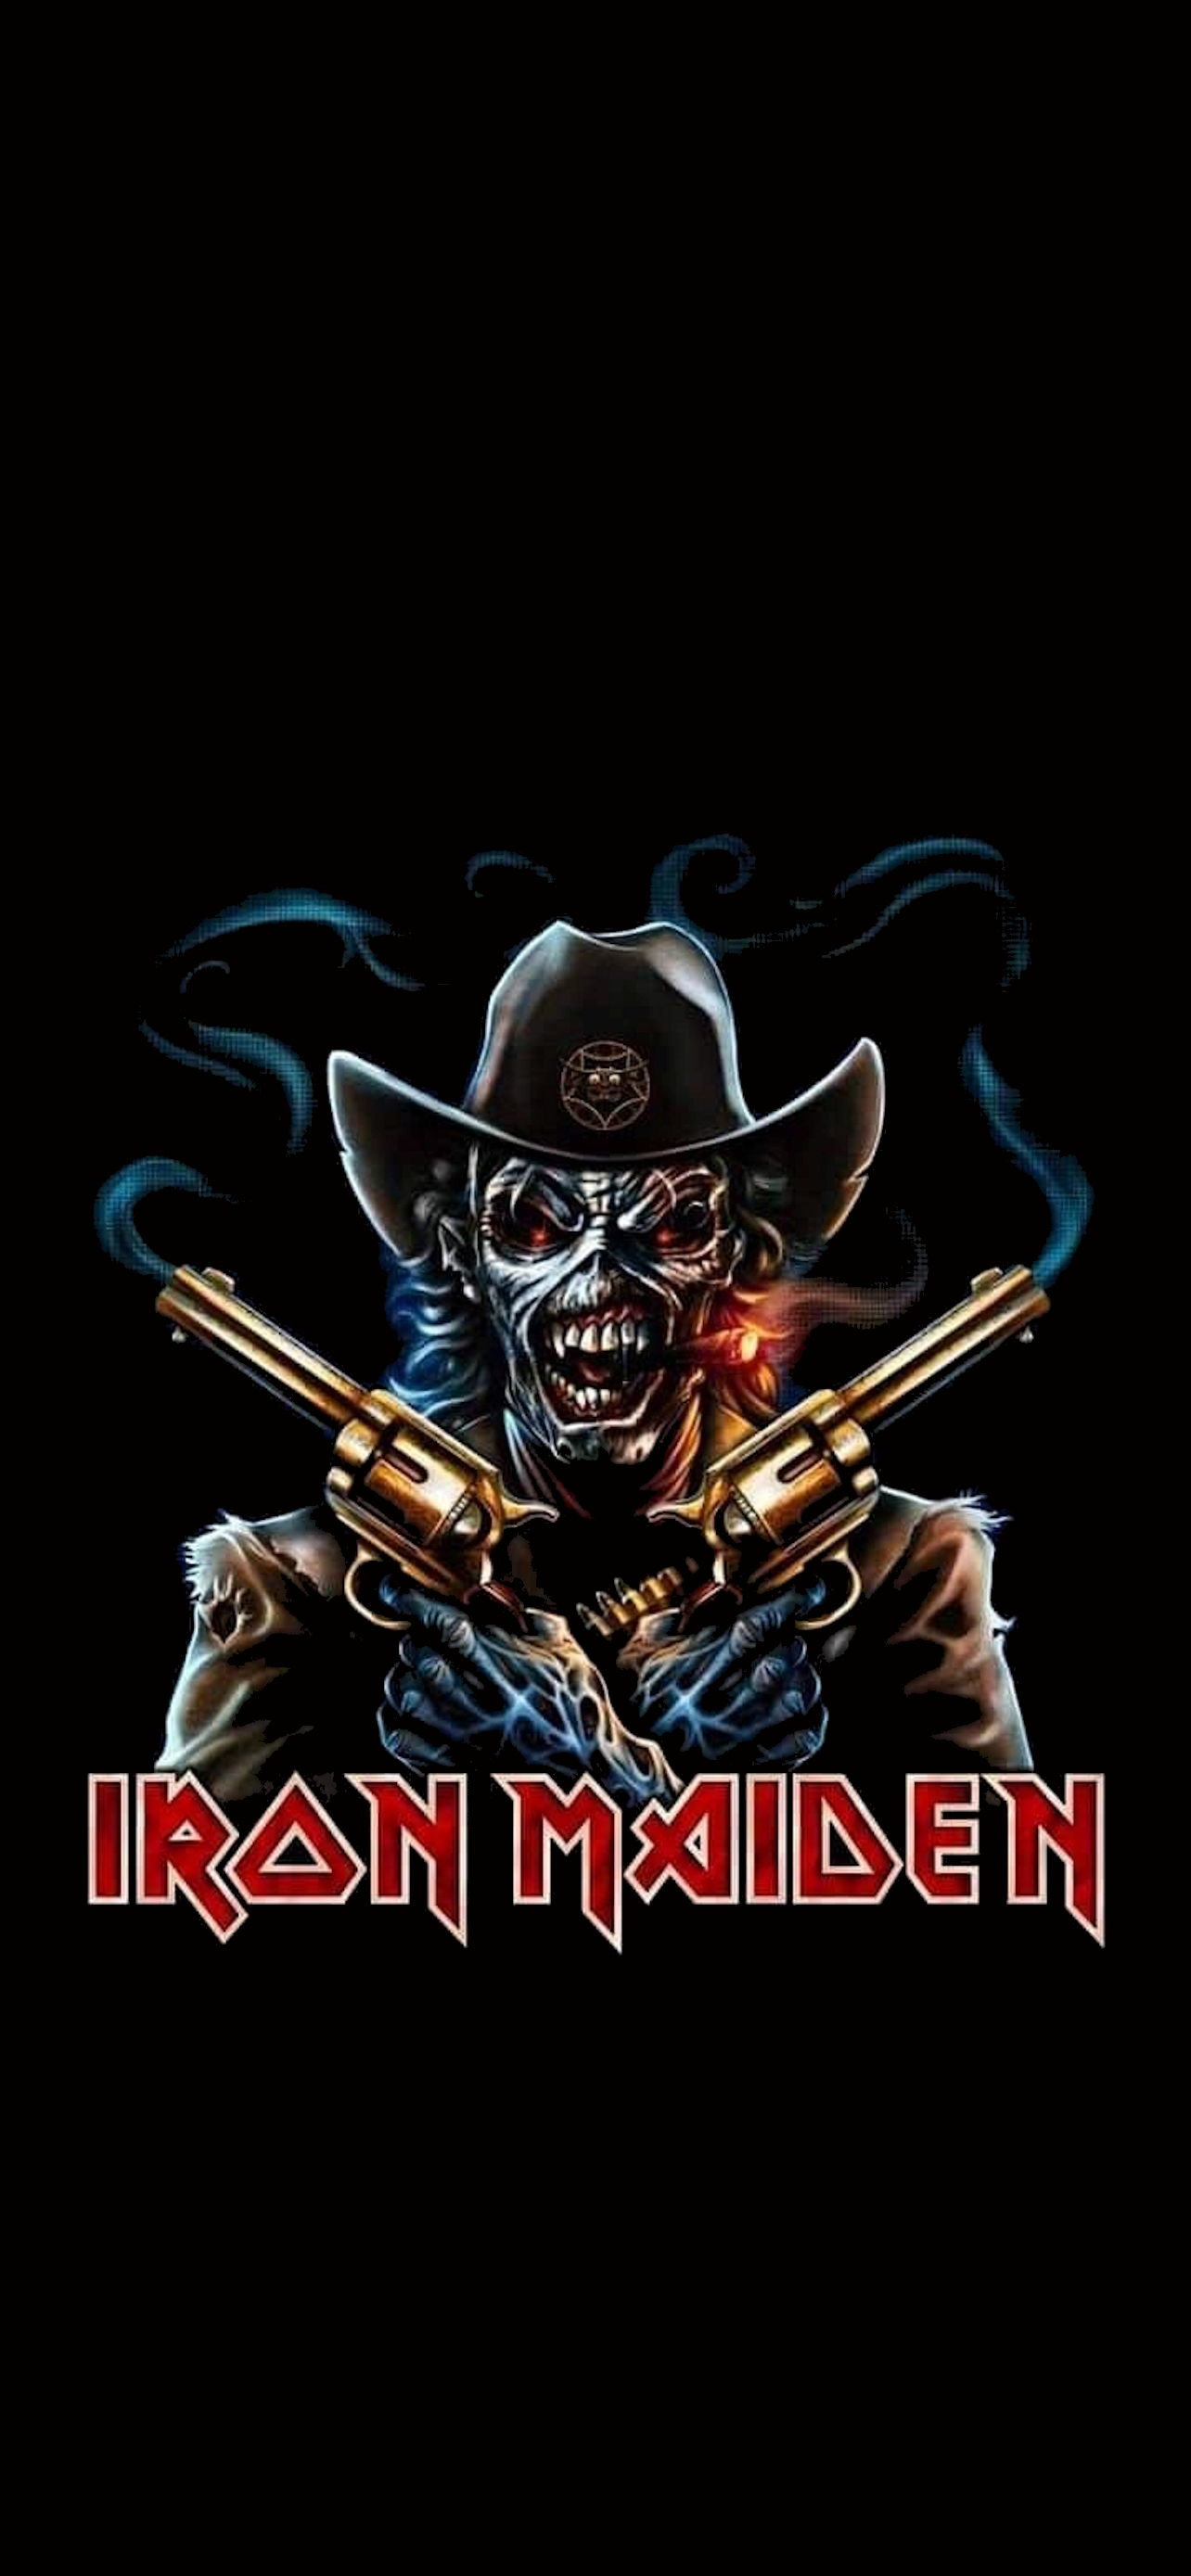 Download free HD wallpaper from above link IronMaidenWallpaper  Iron  maiden posters Iron maiden albums Iron maiden eddie